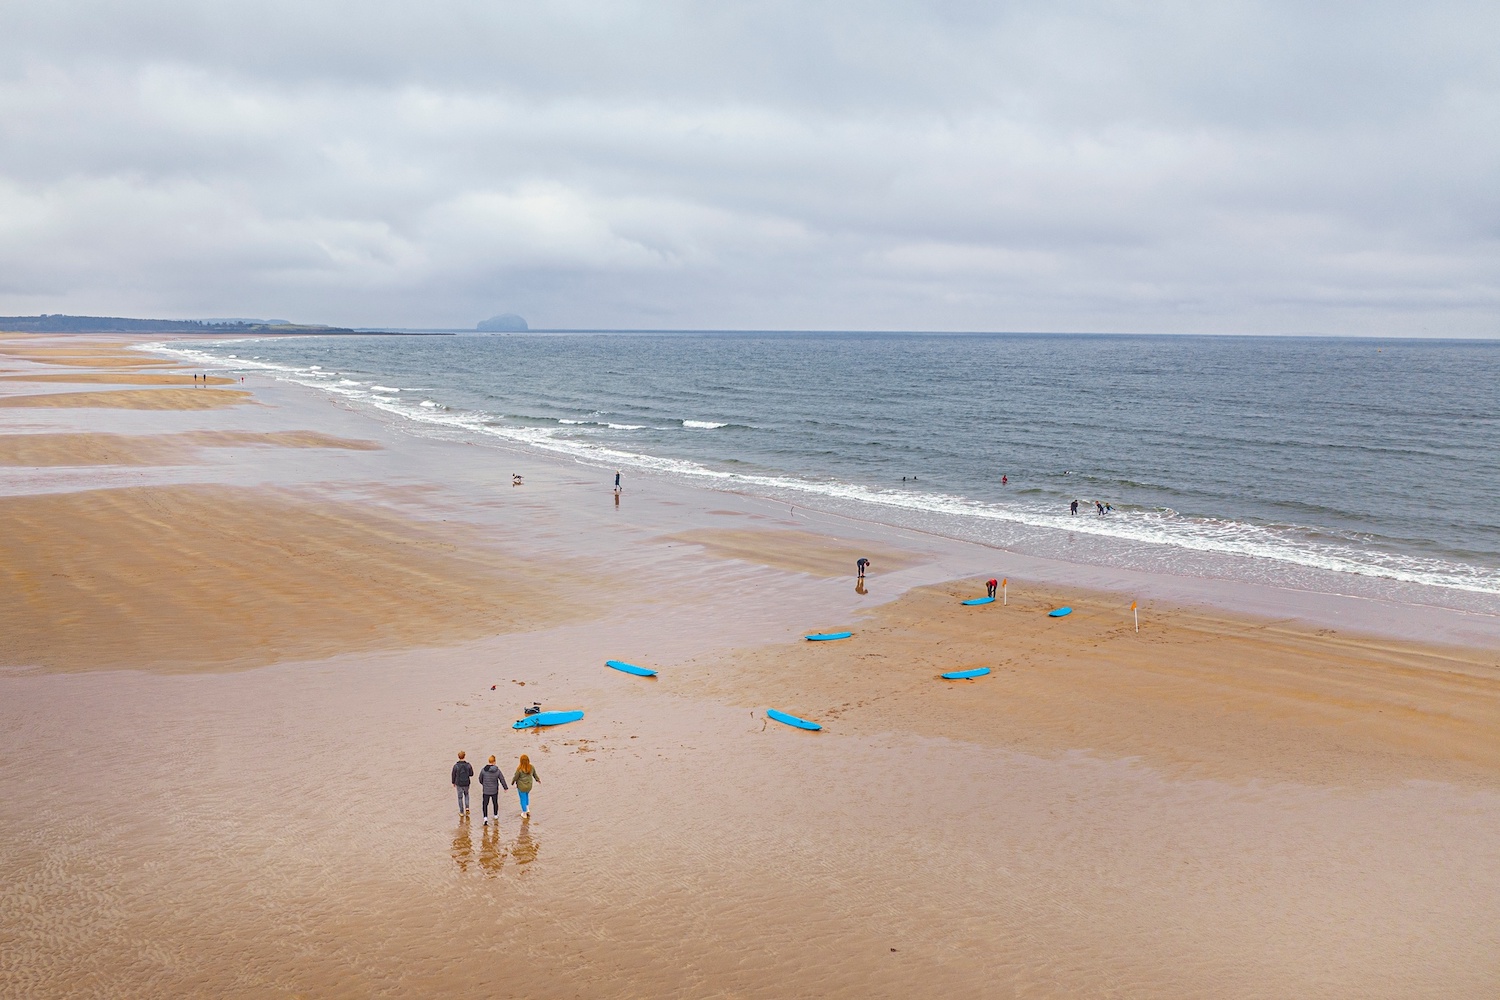 People and surfboards on Belhaven beach, East Lothian